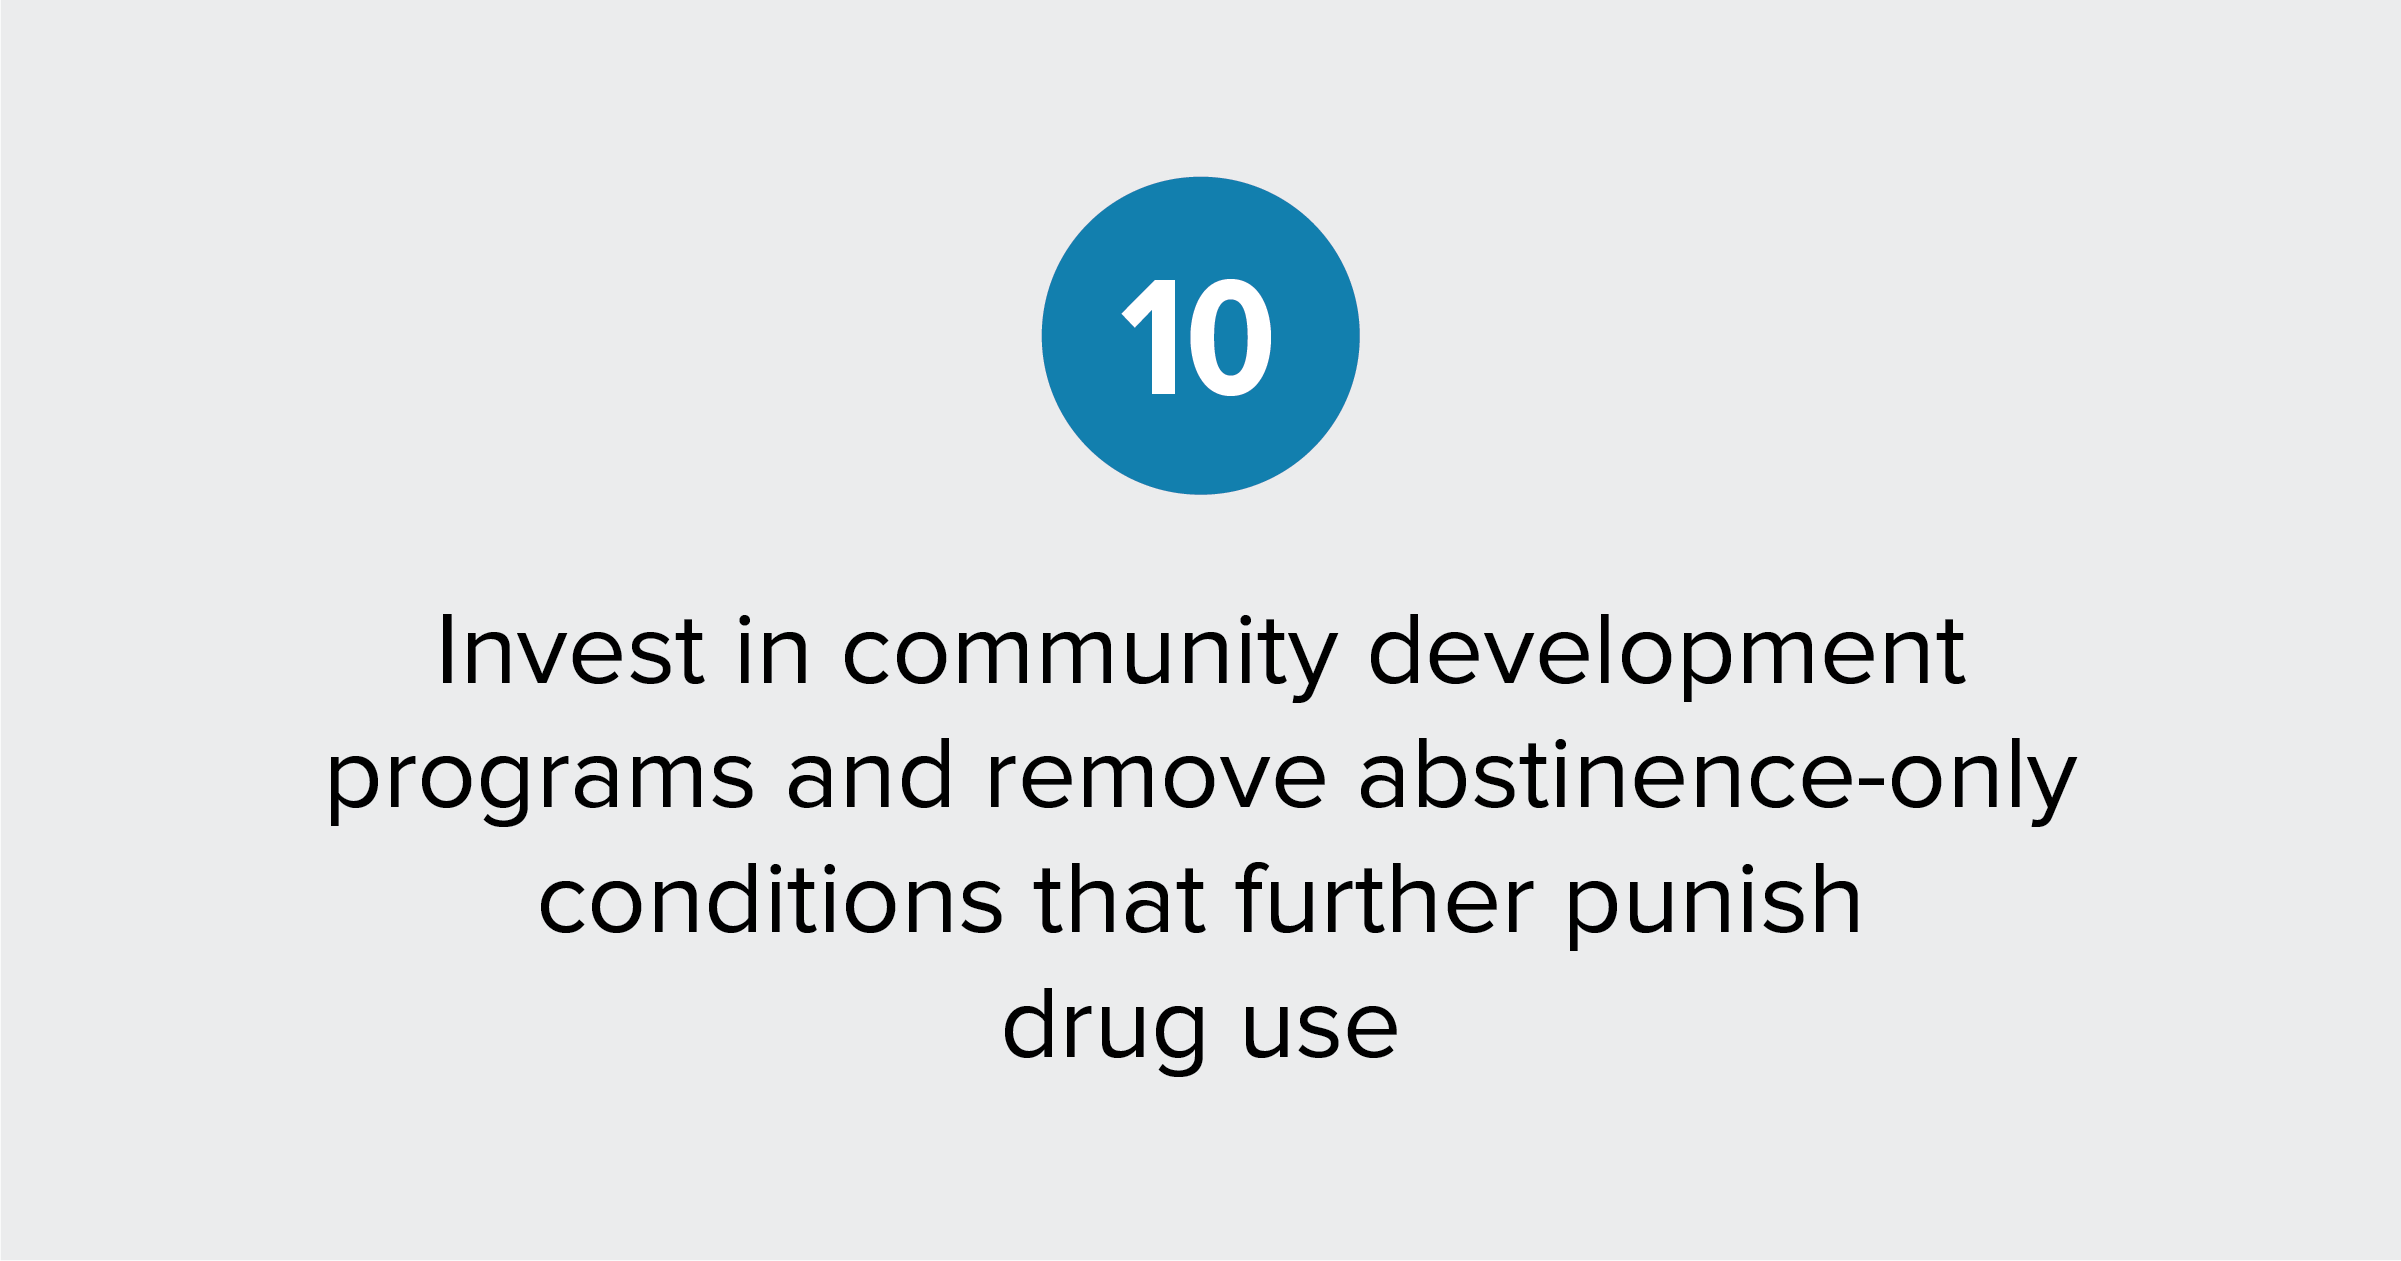 Text of report recommendation 10: Invest in community development programs and remove abstinence-only conditions that further punish drug use